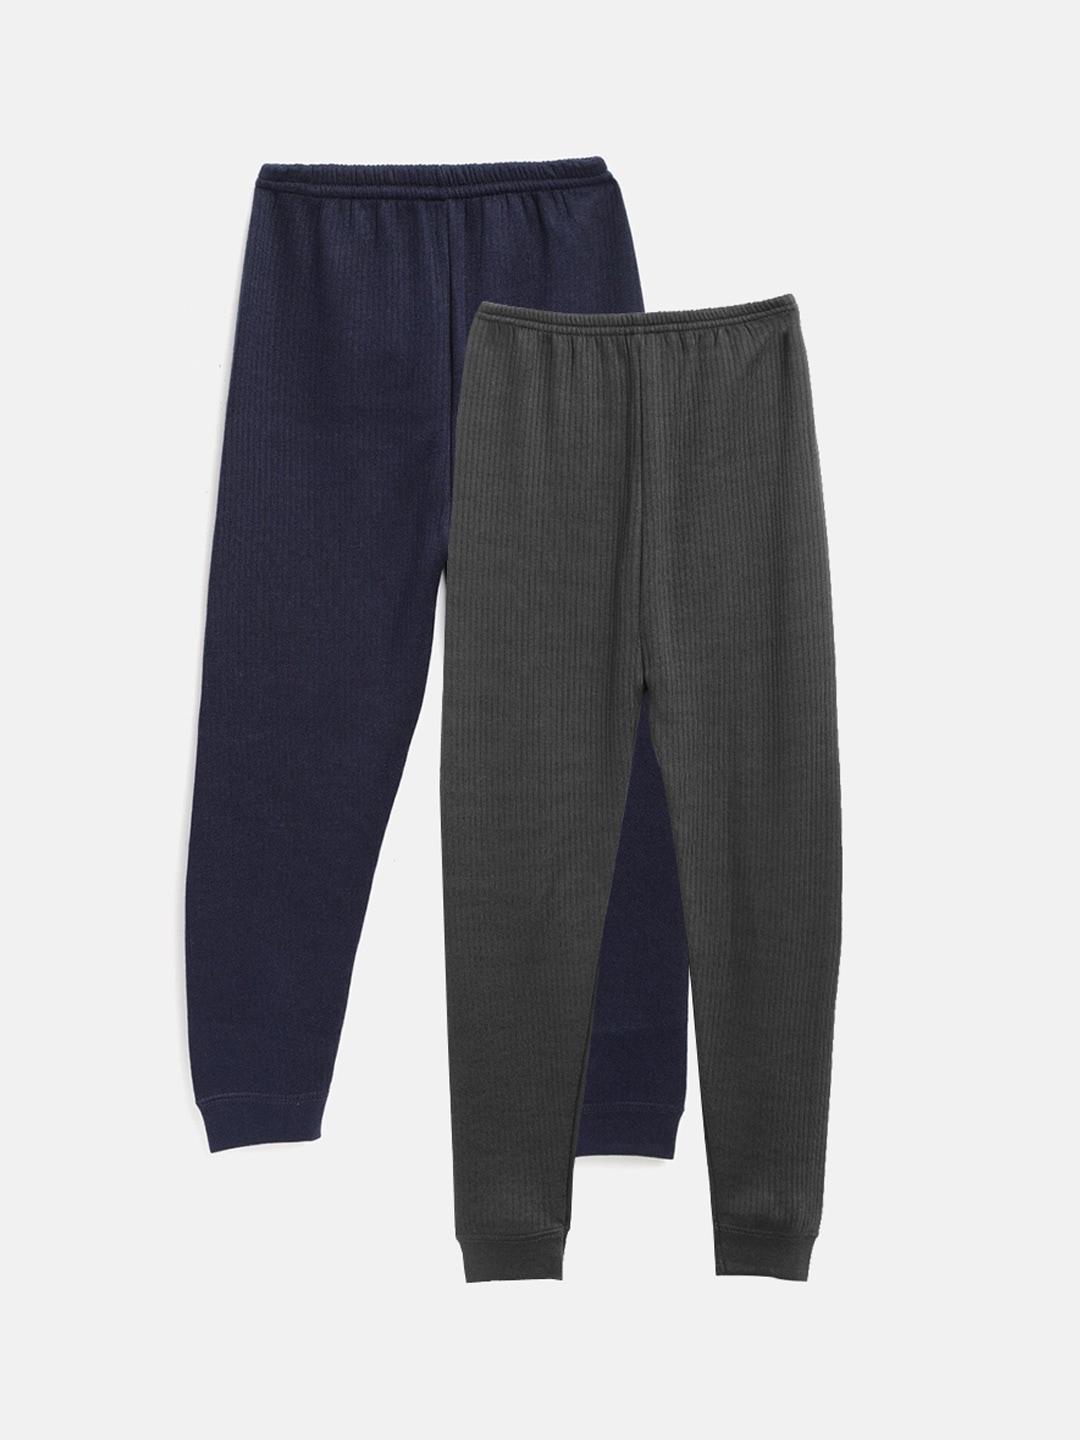 kanvin-boys-charcoal-&-navy-blue-self-striped-thermal-bottoms